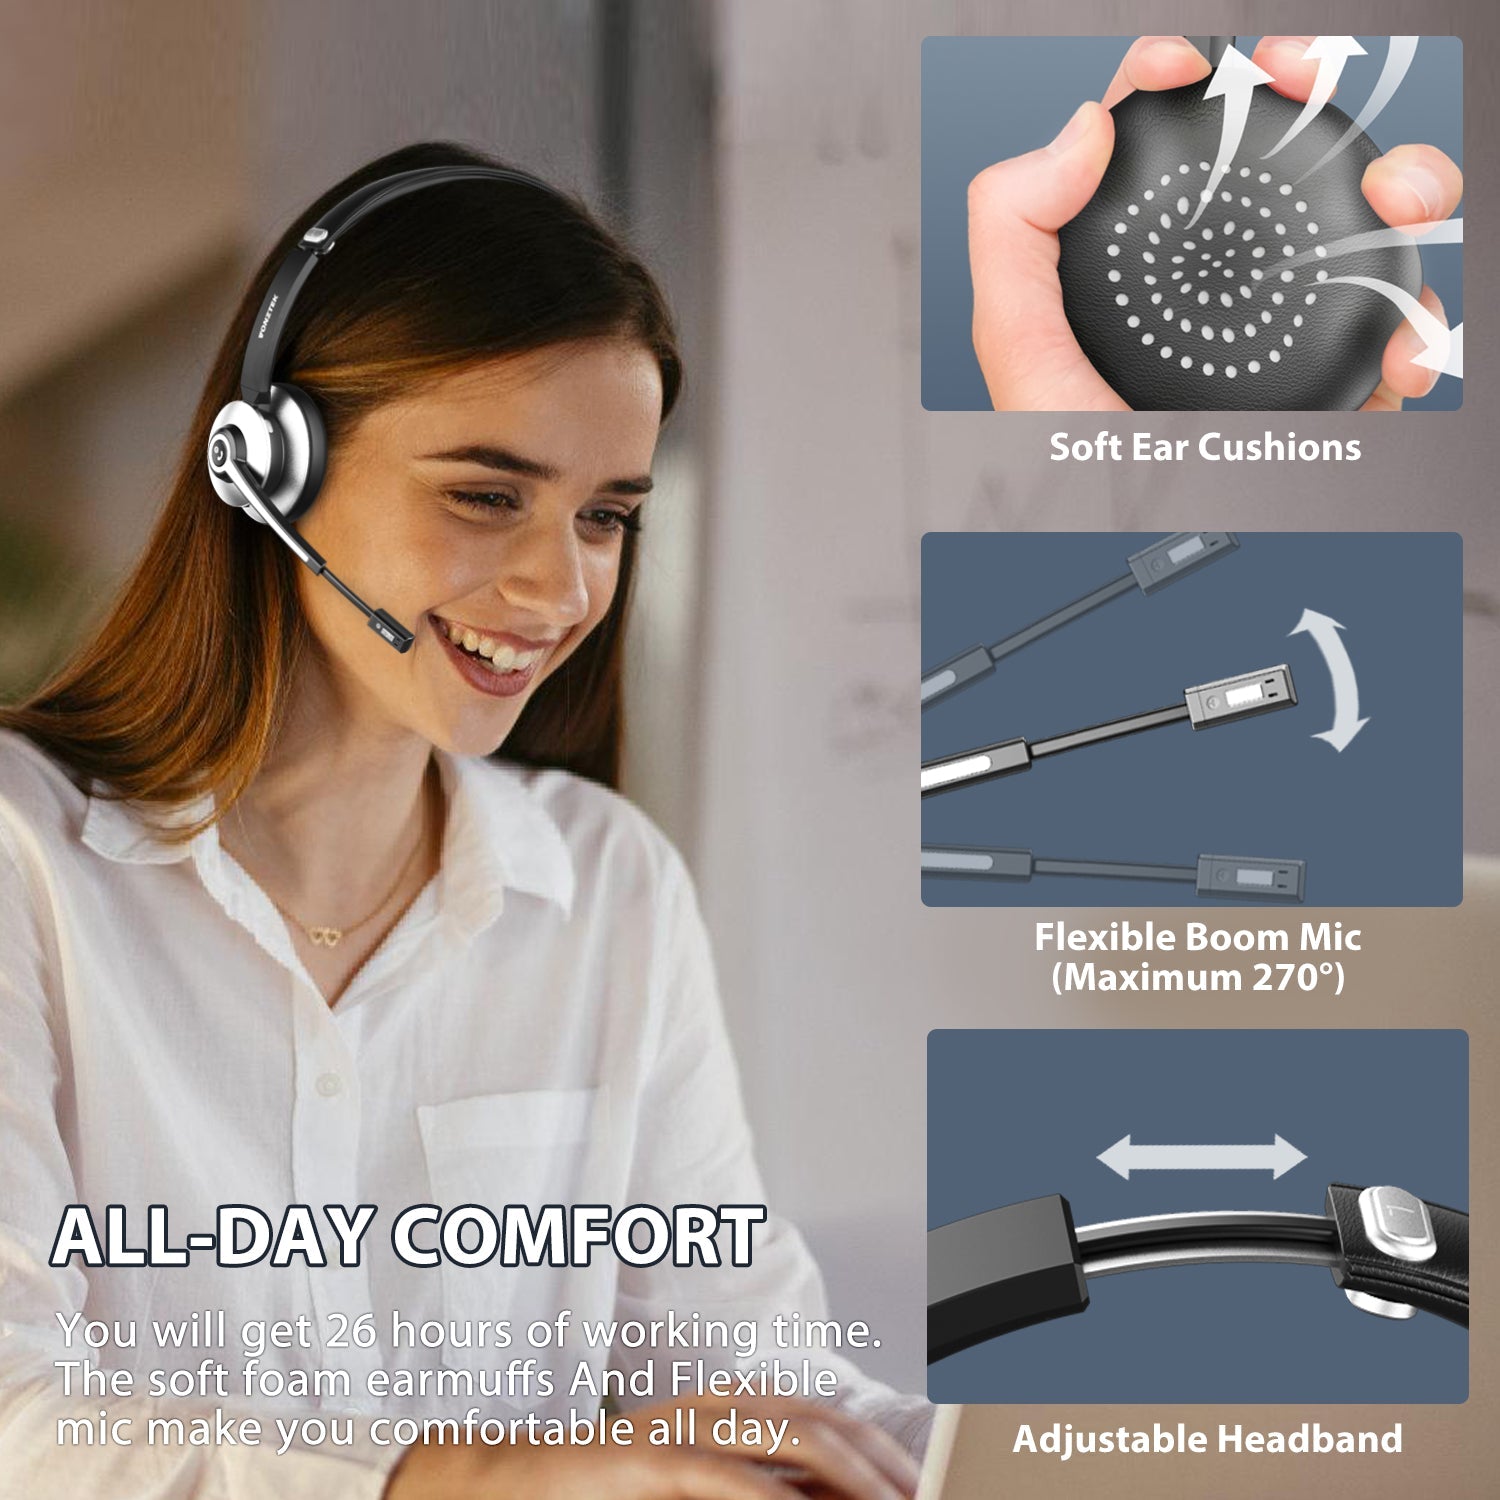 All-day comfort,You will get 26 hours of working time.The soft foam earmuffs and flexible mic make you comfortable all day.Soft ear cushions,Flexible boom mic,Adjustable headband.